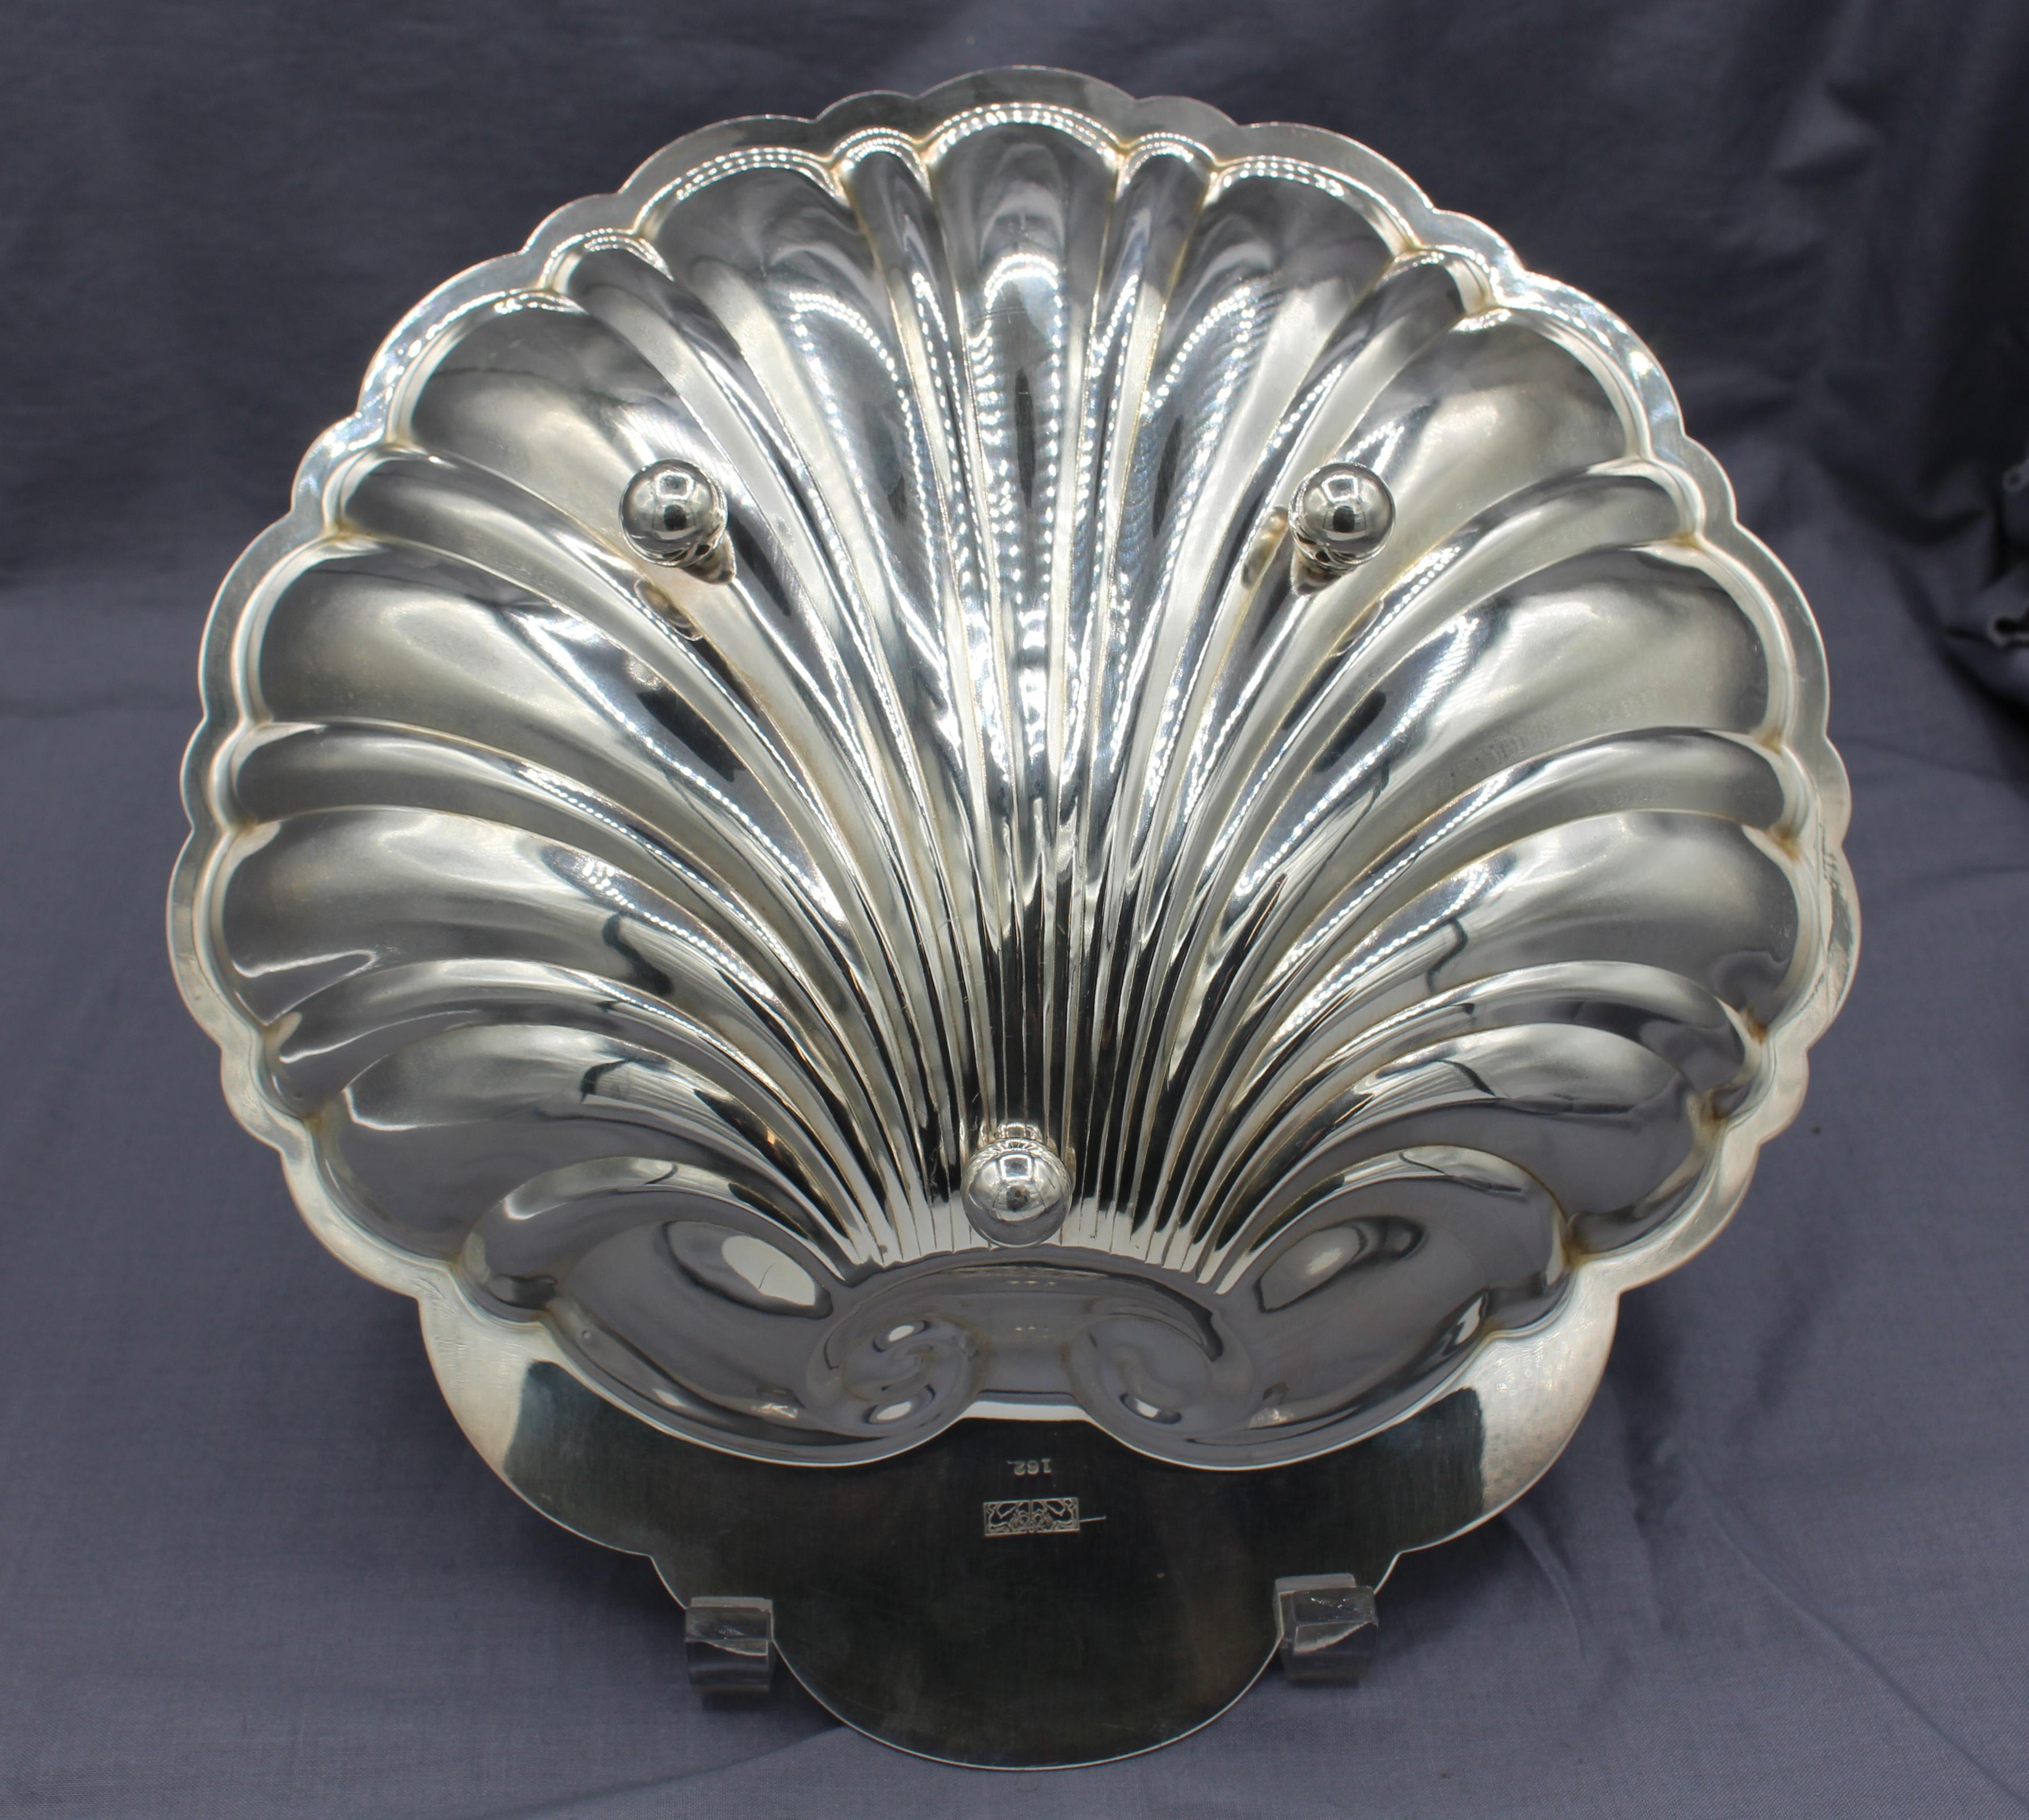 Large scallop shell form silver plated dish. Vintage. Raised on 3 ball feet. Very well modelled.
11